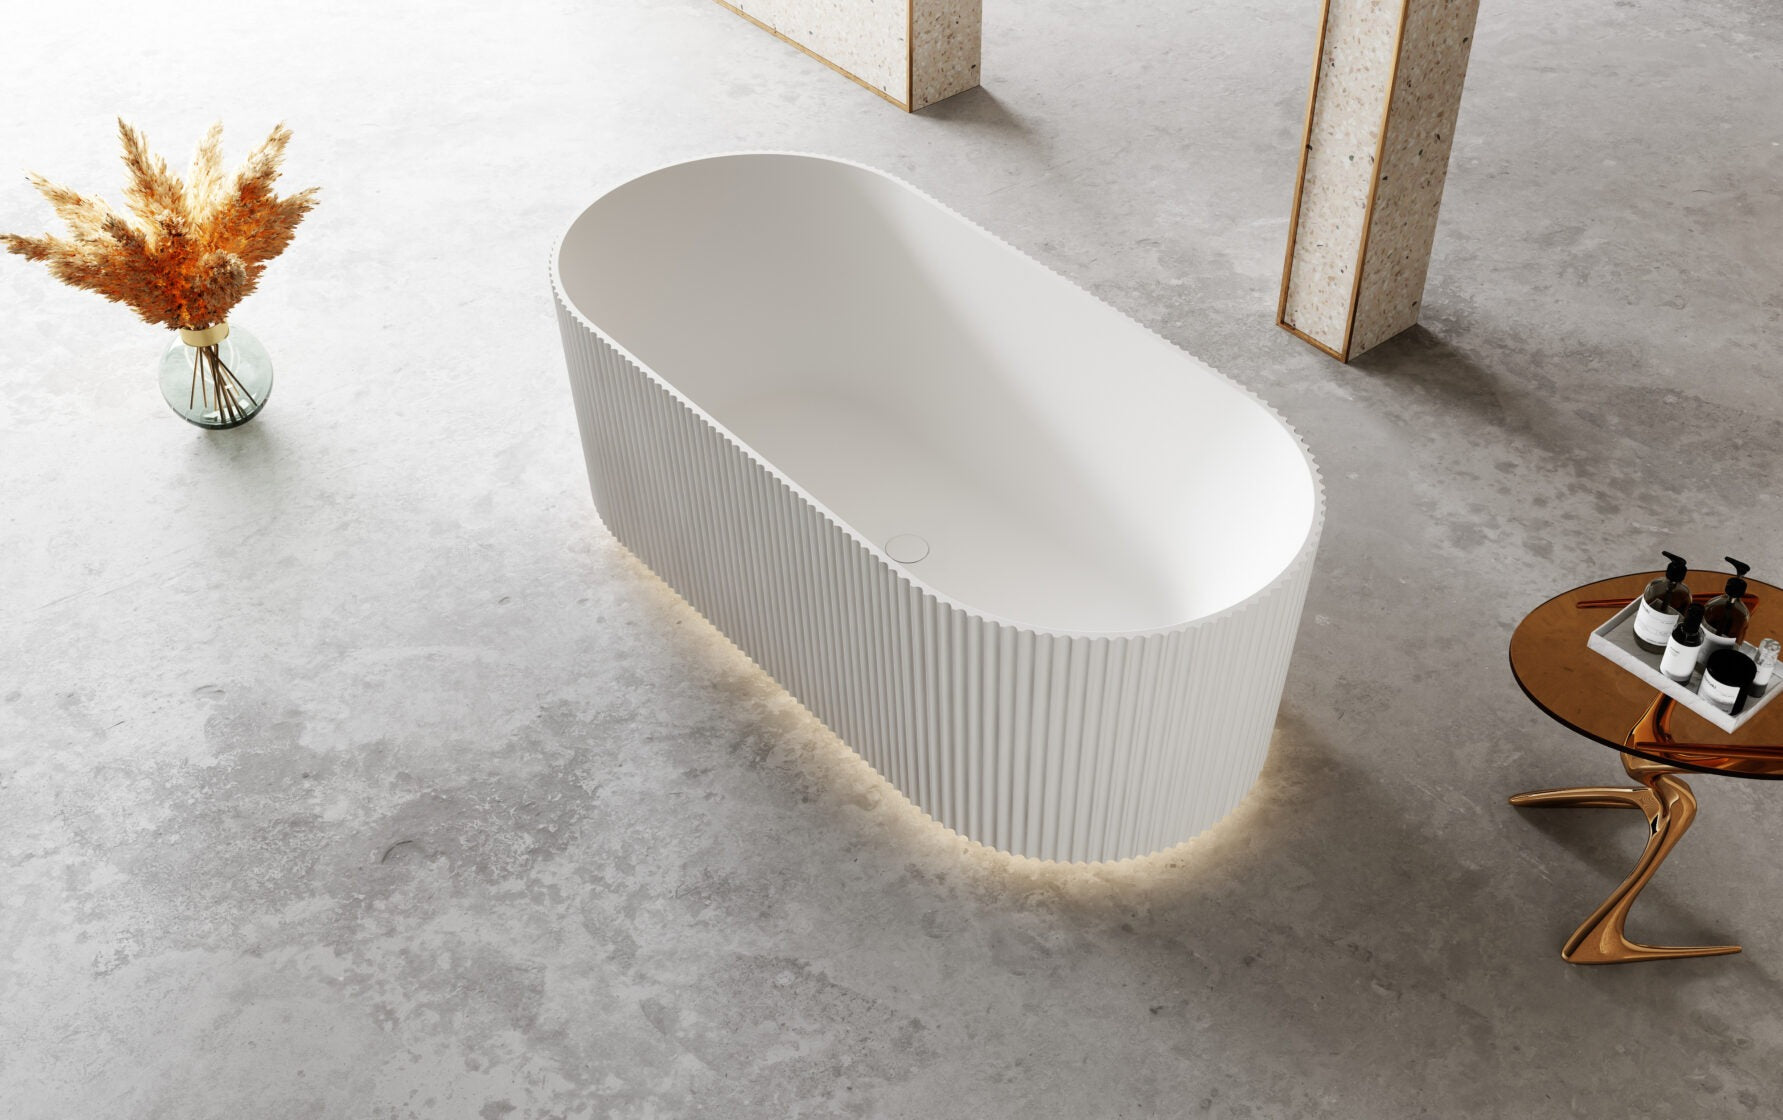 RIVA OSLO V-GROOVE FREESTANDING BATHTUB GLOSS WHITE (AVAILABLE IN 1500MM AND 1700MM)